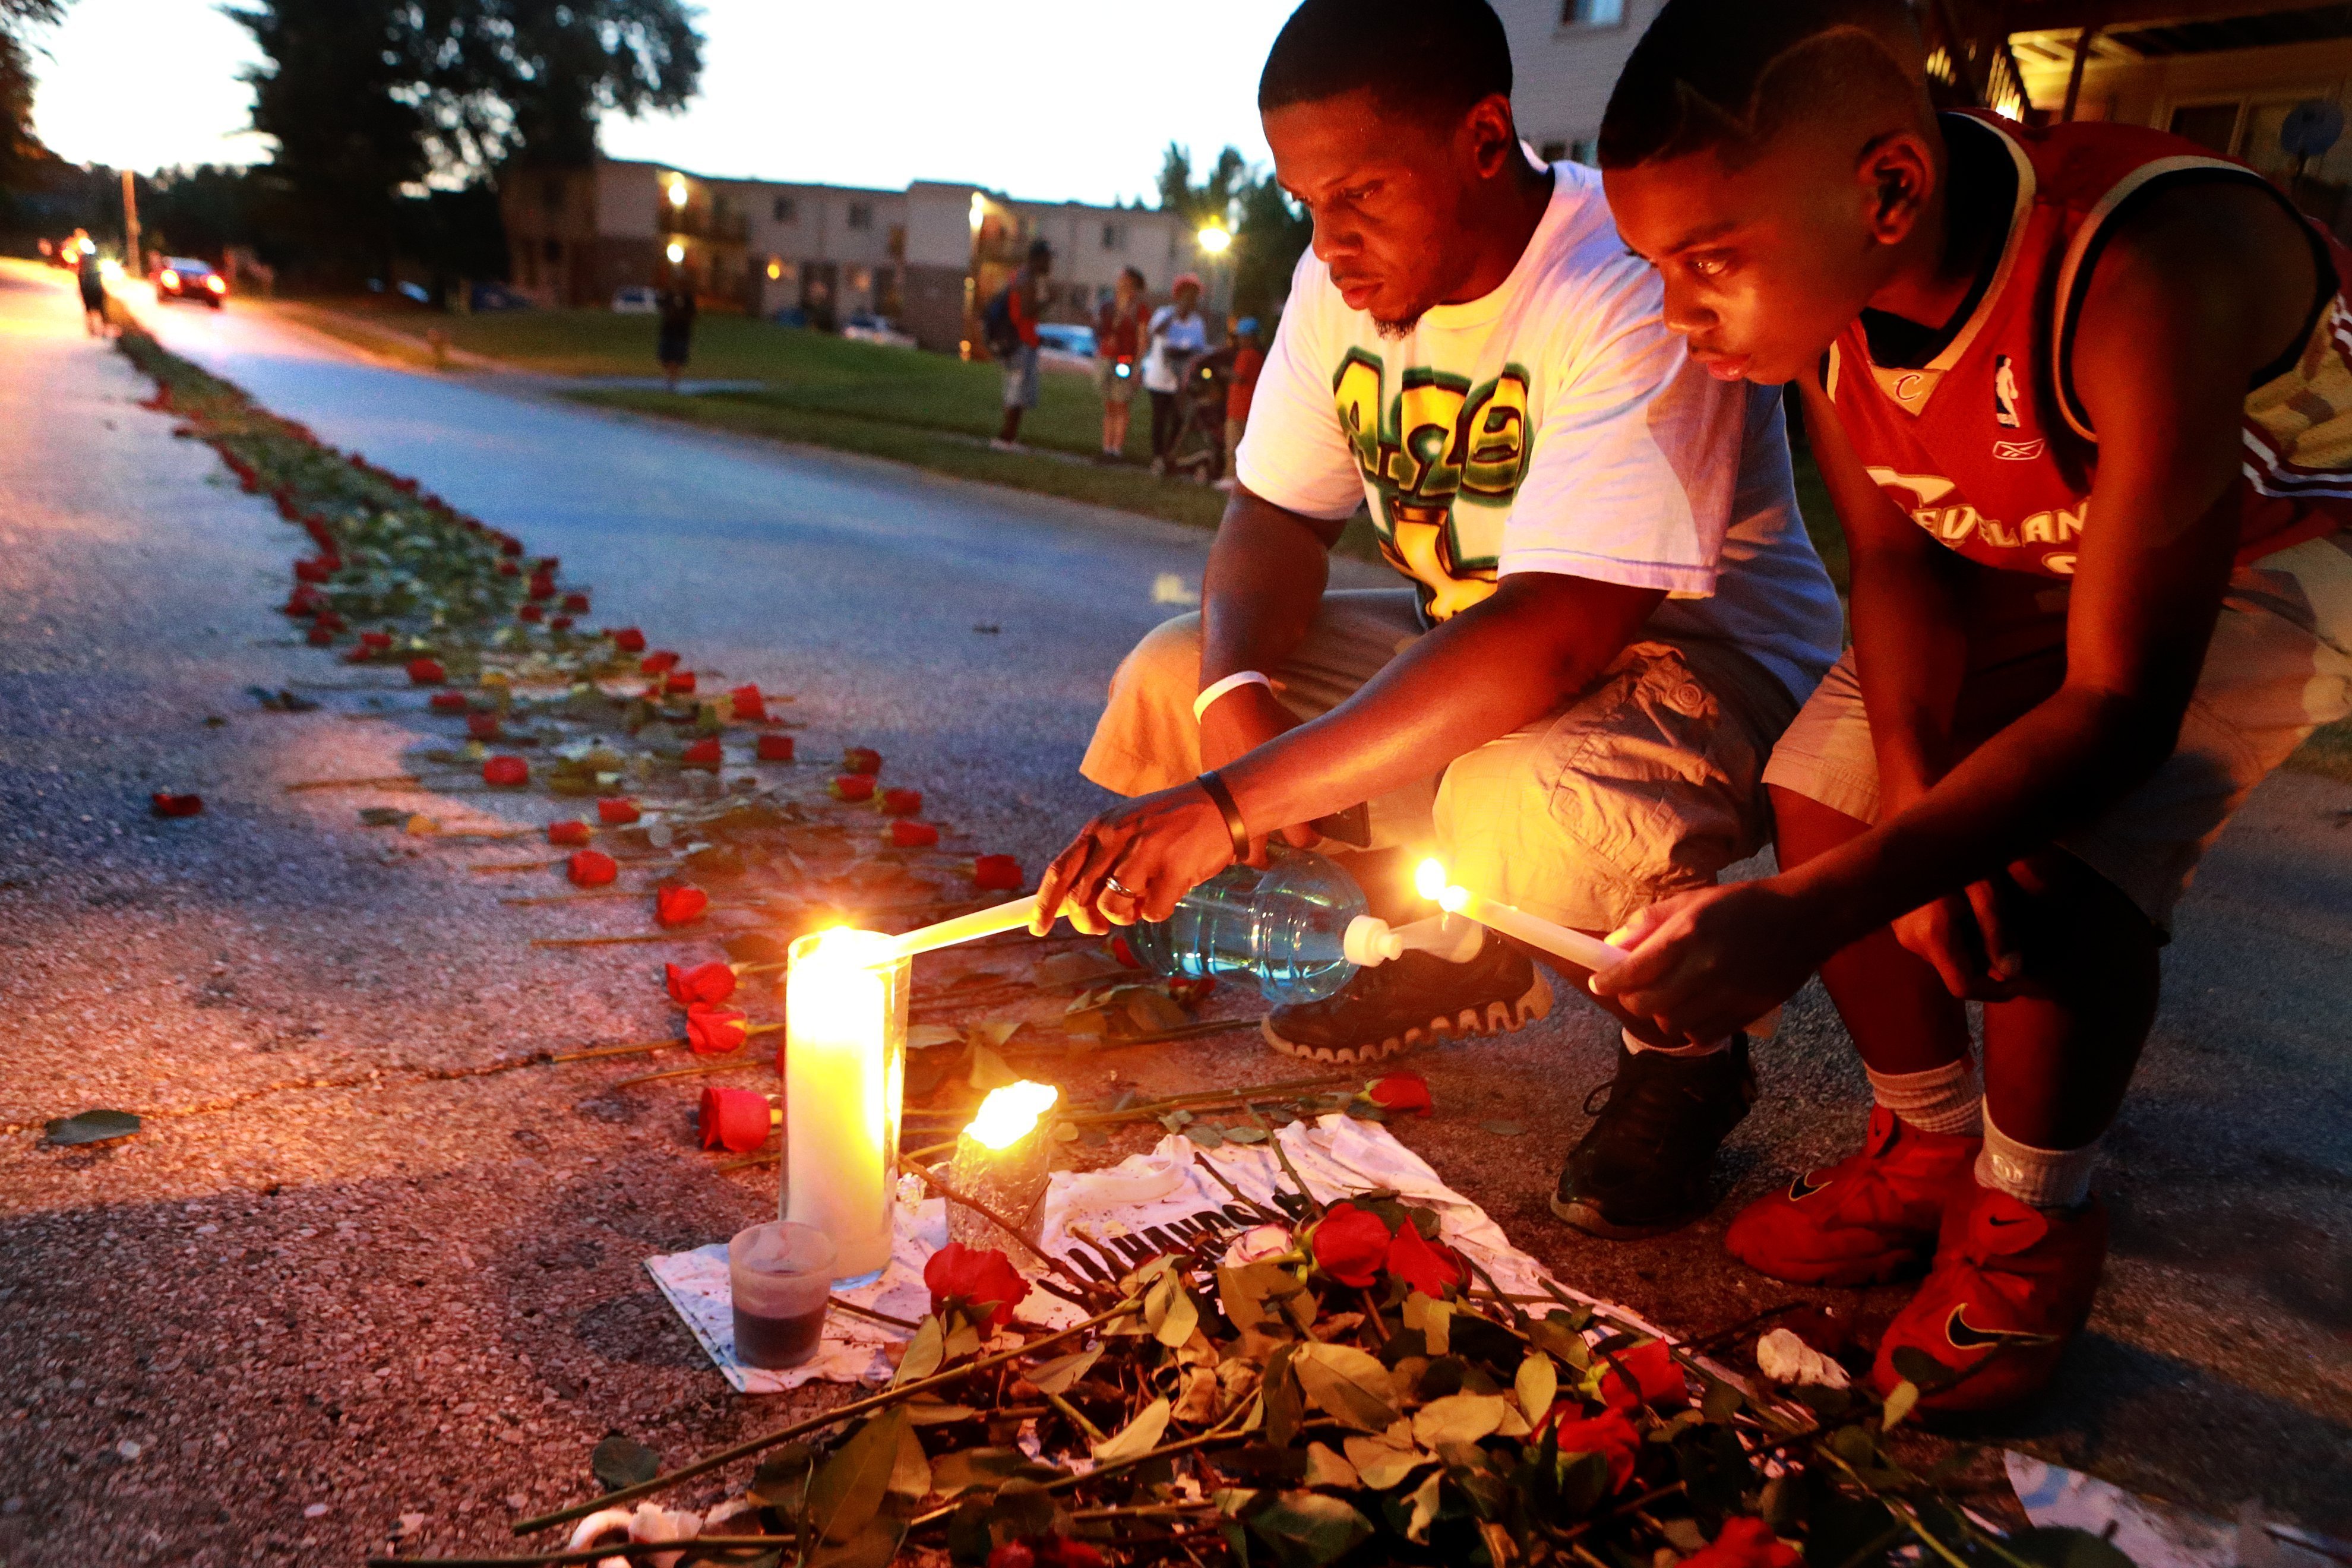 Theo Murphy (left) of Florissant and his brother Jordan Marshall light candles, at a memorial on Canfield Drive where unarmed teen Michael Brown was fatally shot, Aug. 21, 2014 in Ferguson, Mo. (Christian Gooden—St. Louis Post-Dispatch/Polaris)